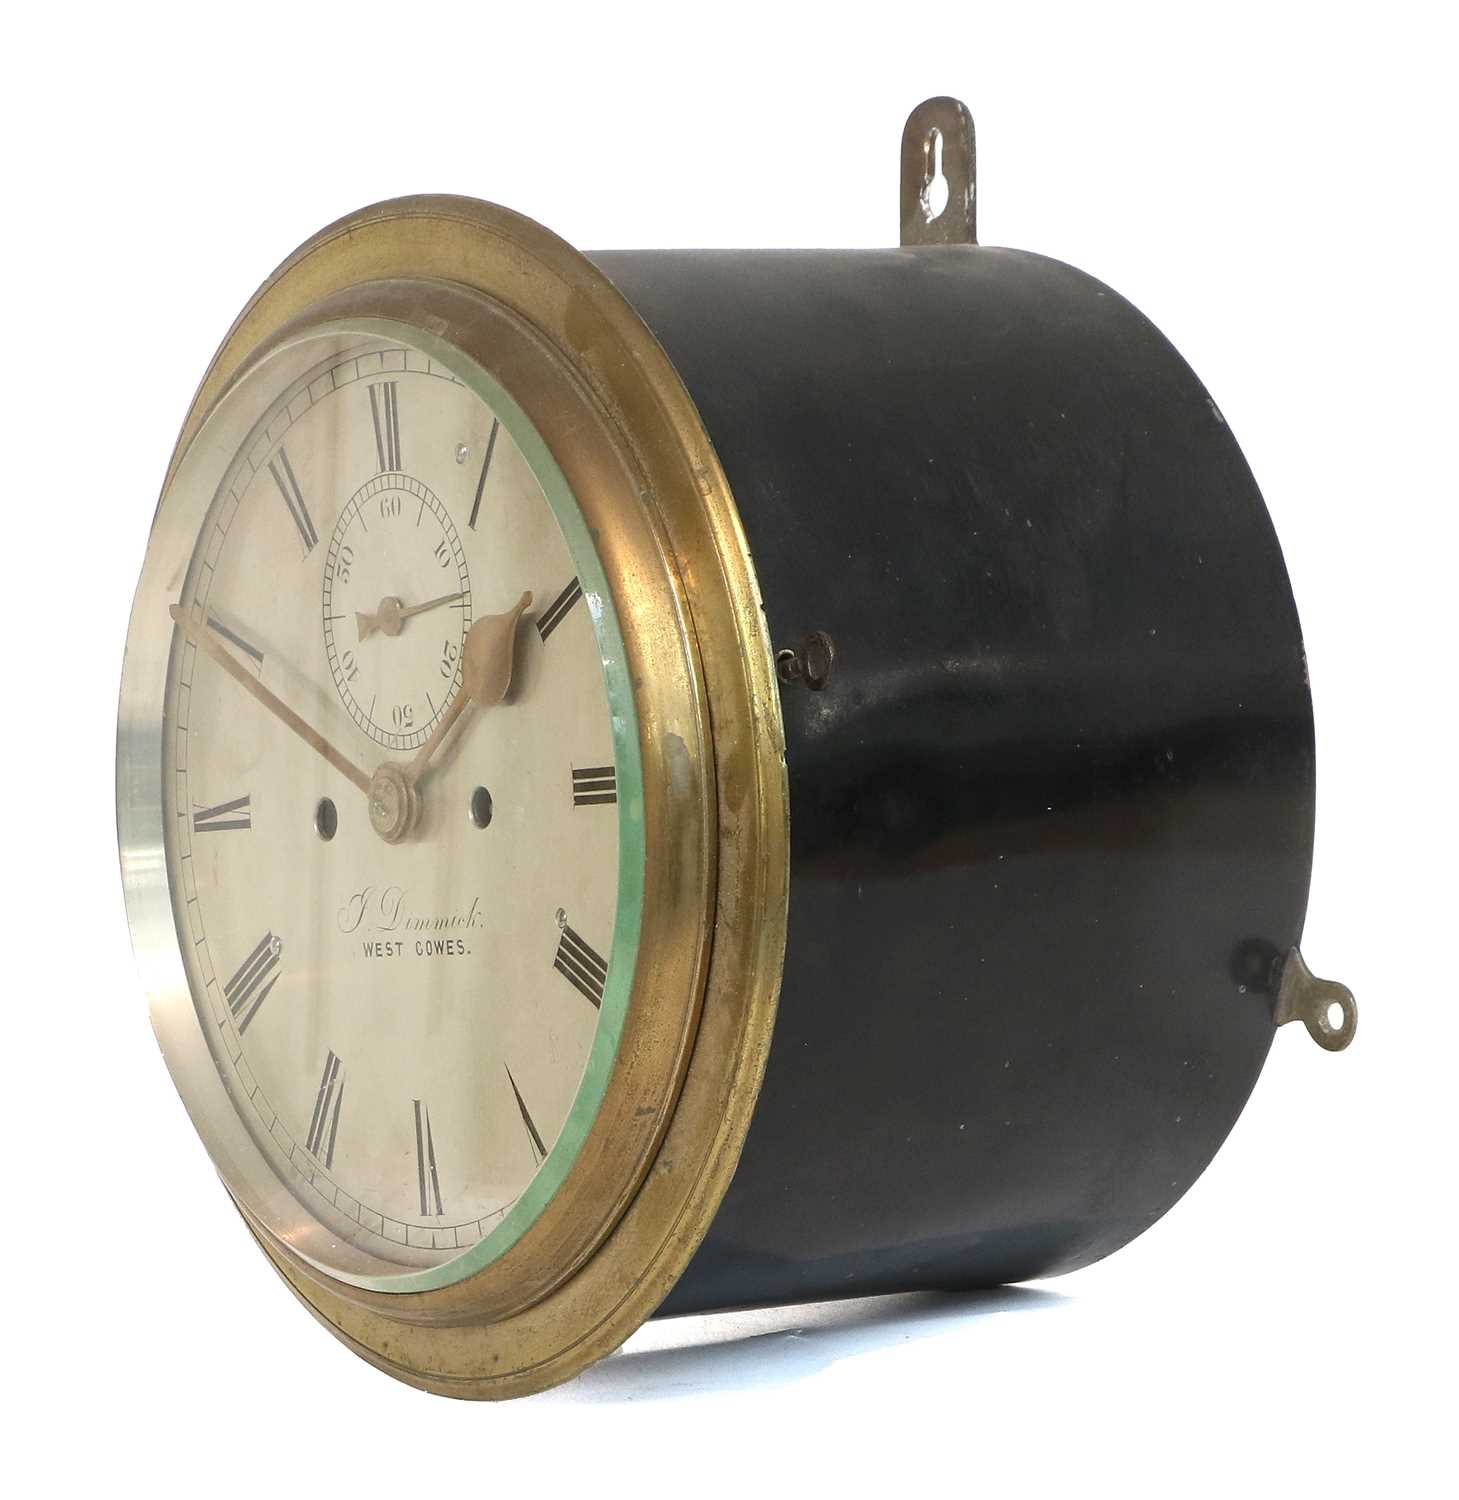 A Ships Type BulkHead Striking Wall Clock, signed J Dimmick, West Cowes, circa 1890, brass cast - Image 4 of 16